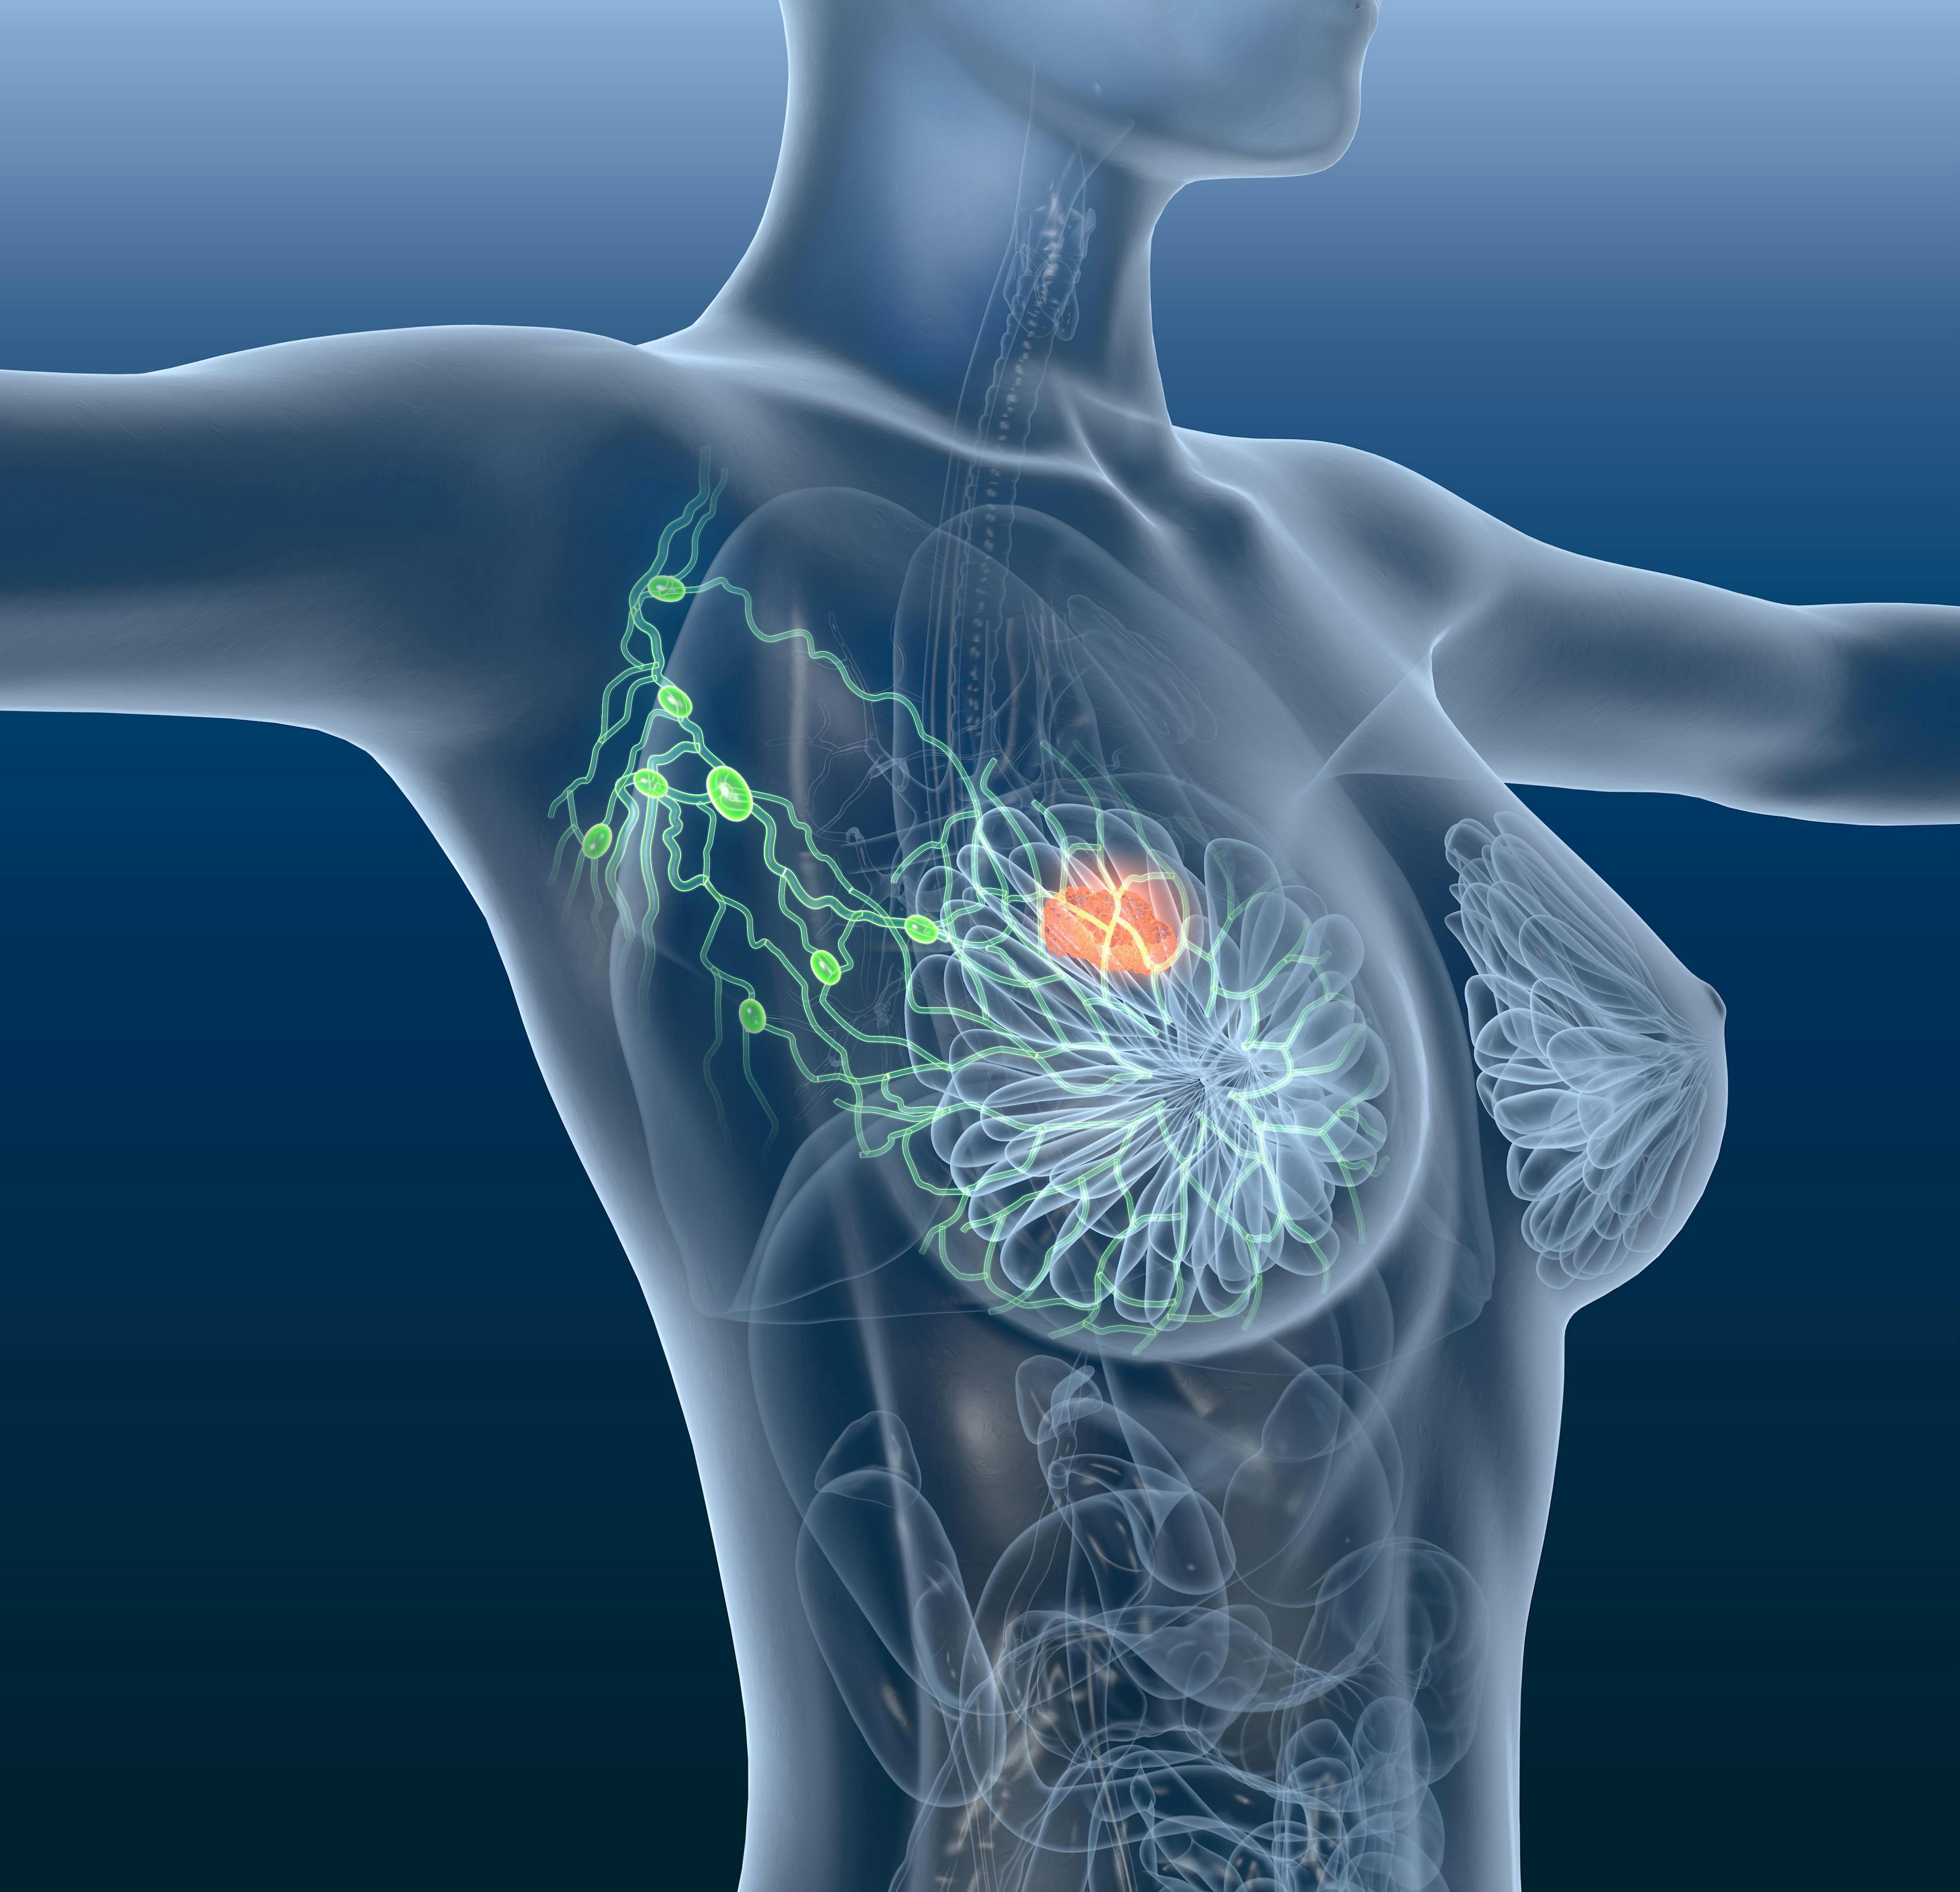 Real-World Evidence Supports Efficacy of Palbociclib Plus Letrozole in HR+/HER2– Breast Cancer